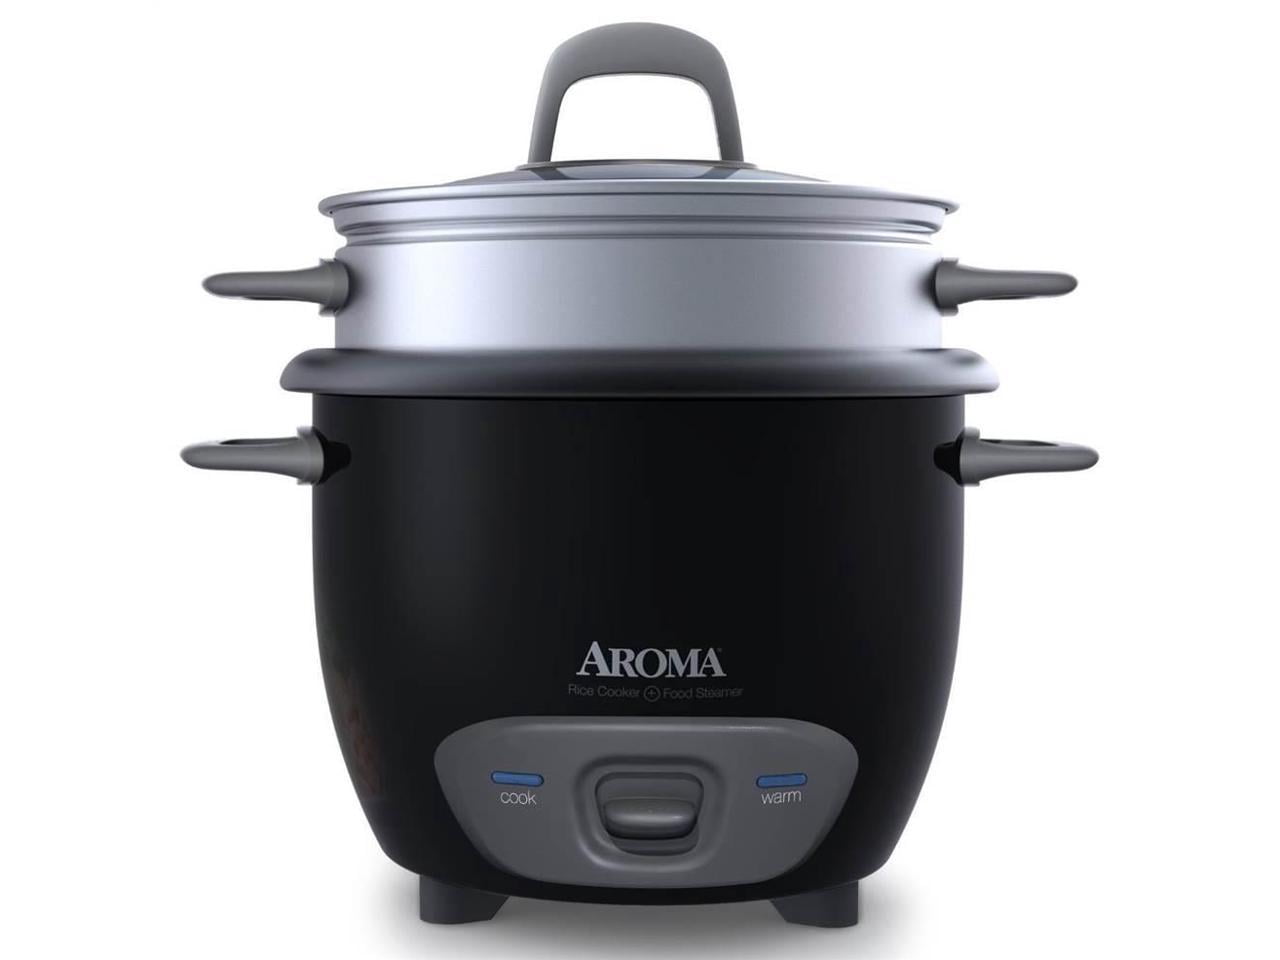 AROMA ARC1120SBL Black/Stainless Steel 20-Cup SmartCarb Rice Cooker